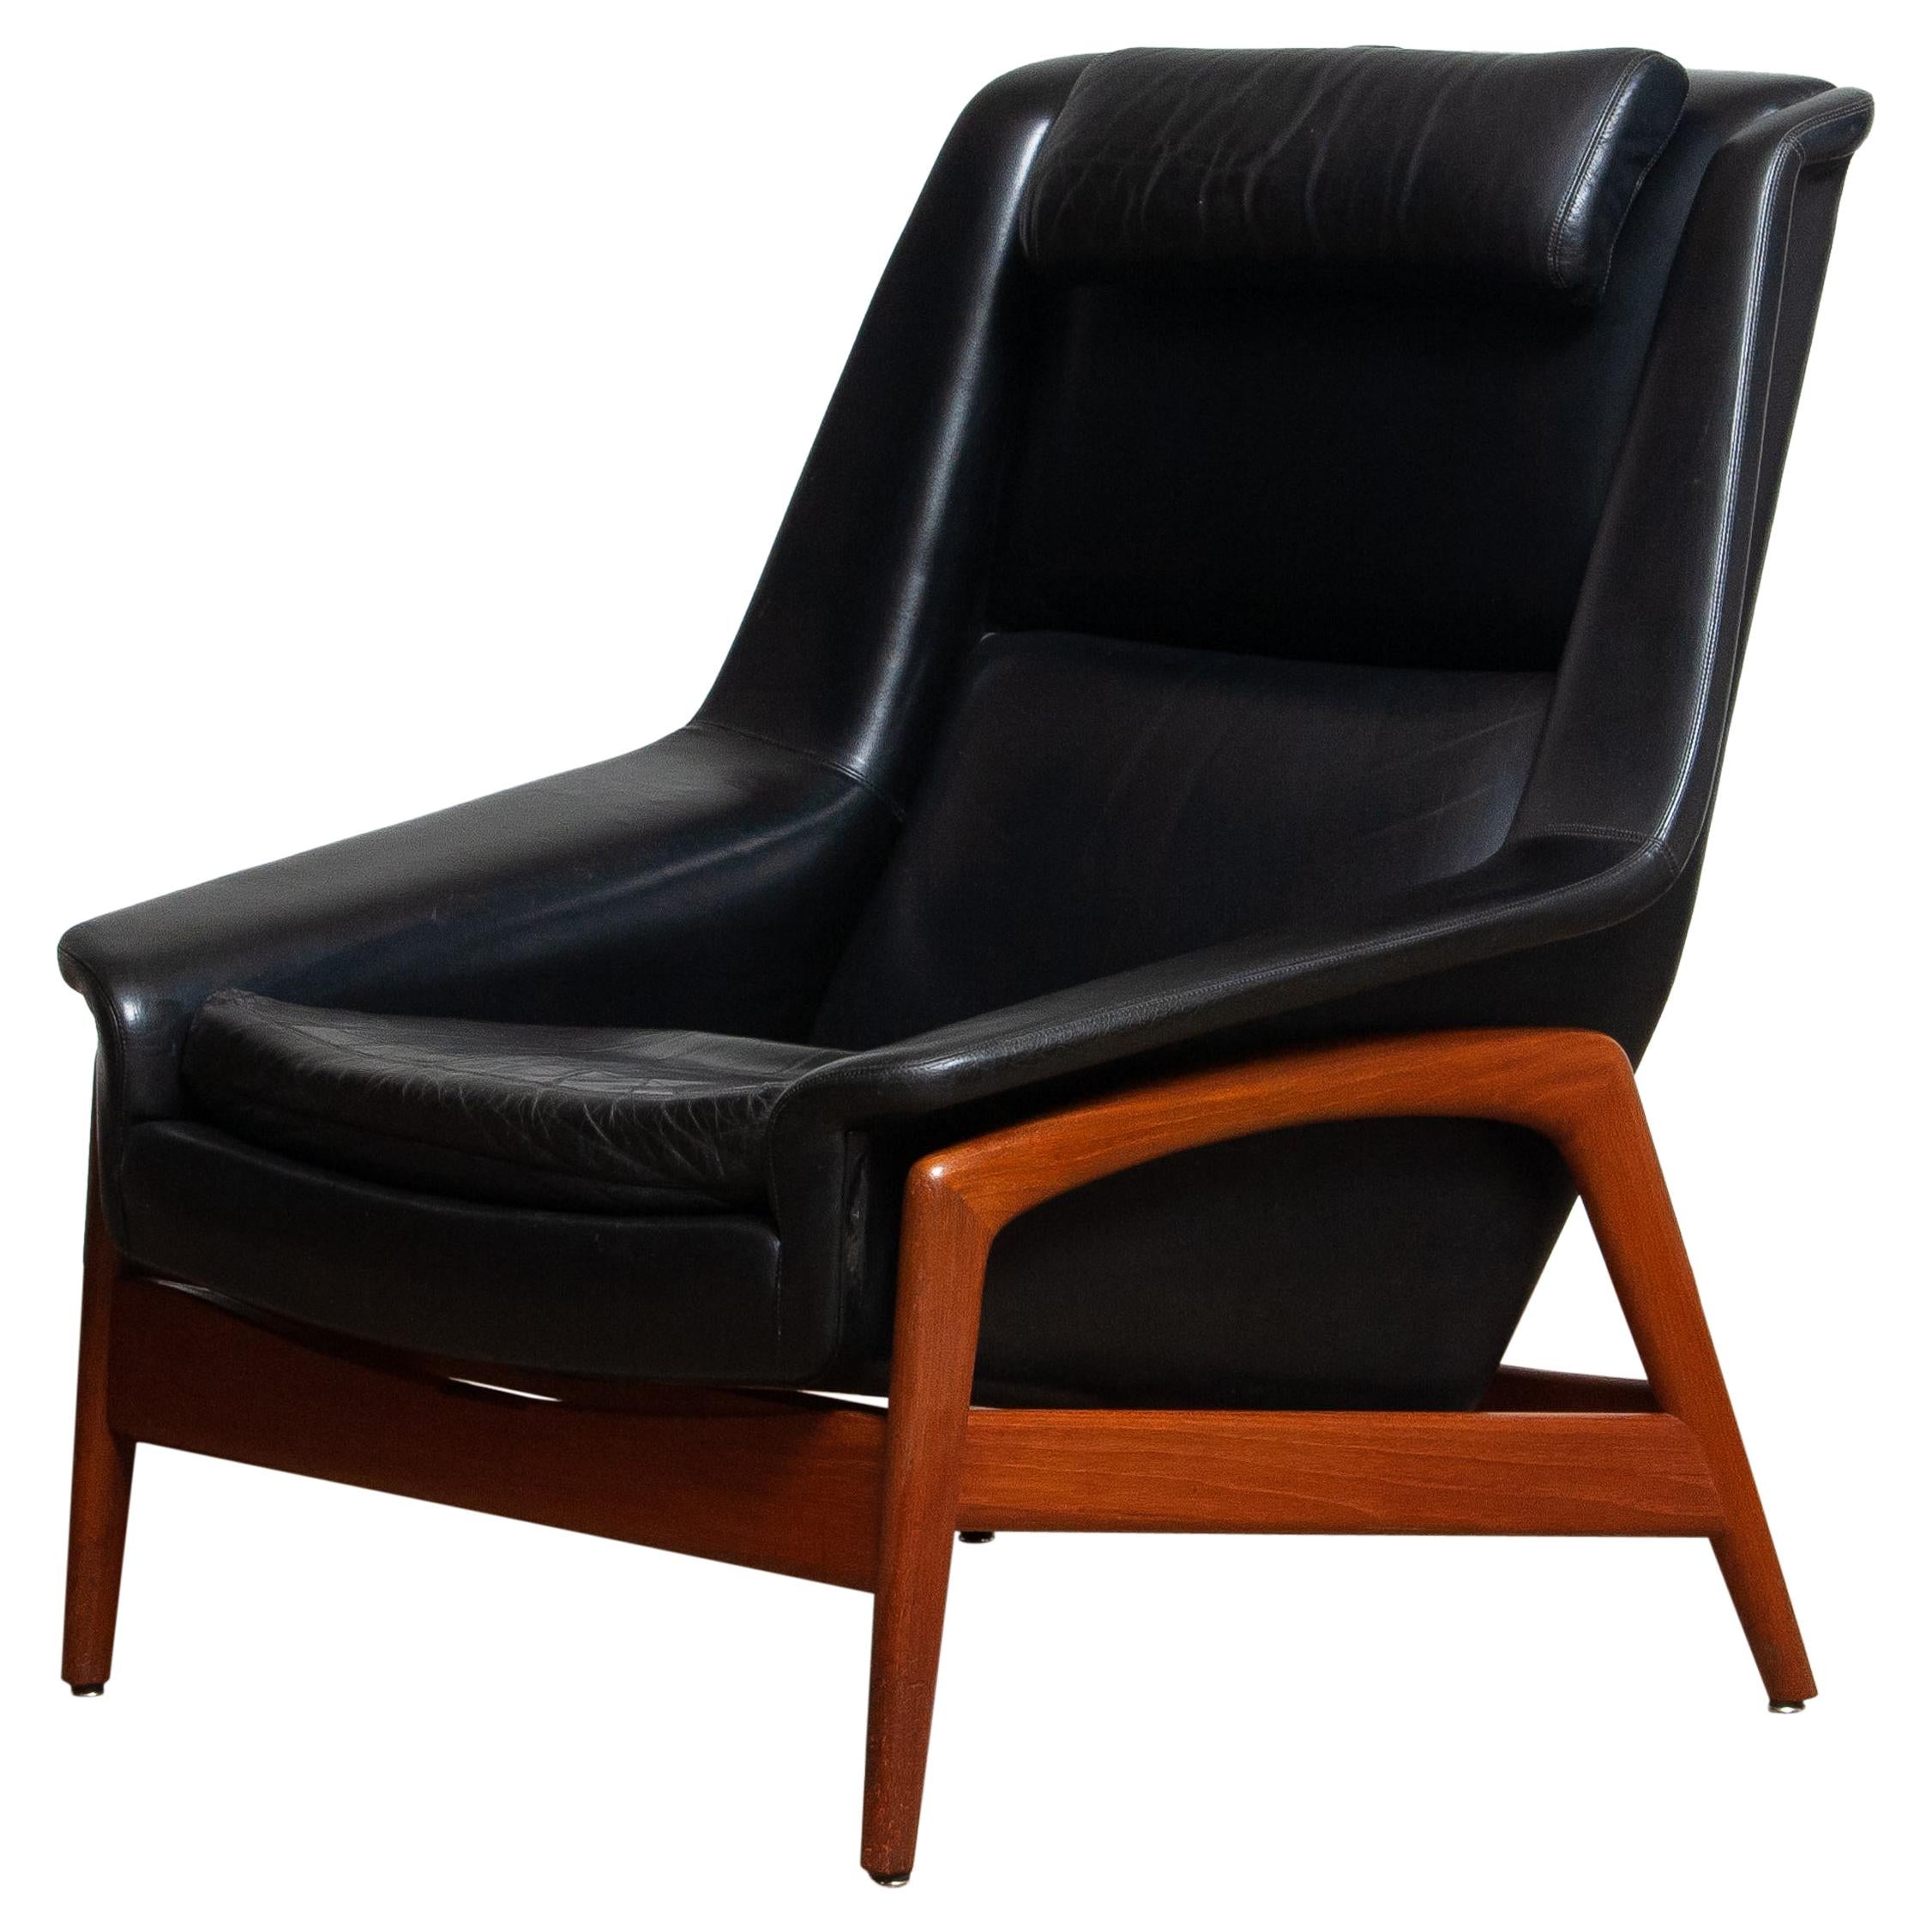 Stunning easy / lounge chair in teak and upholstered in black leather by Folke Ohlsson for DUX Sweden,
Model; Profil
Overall in good condition.